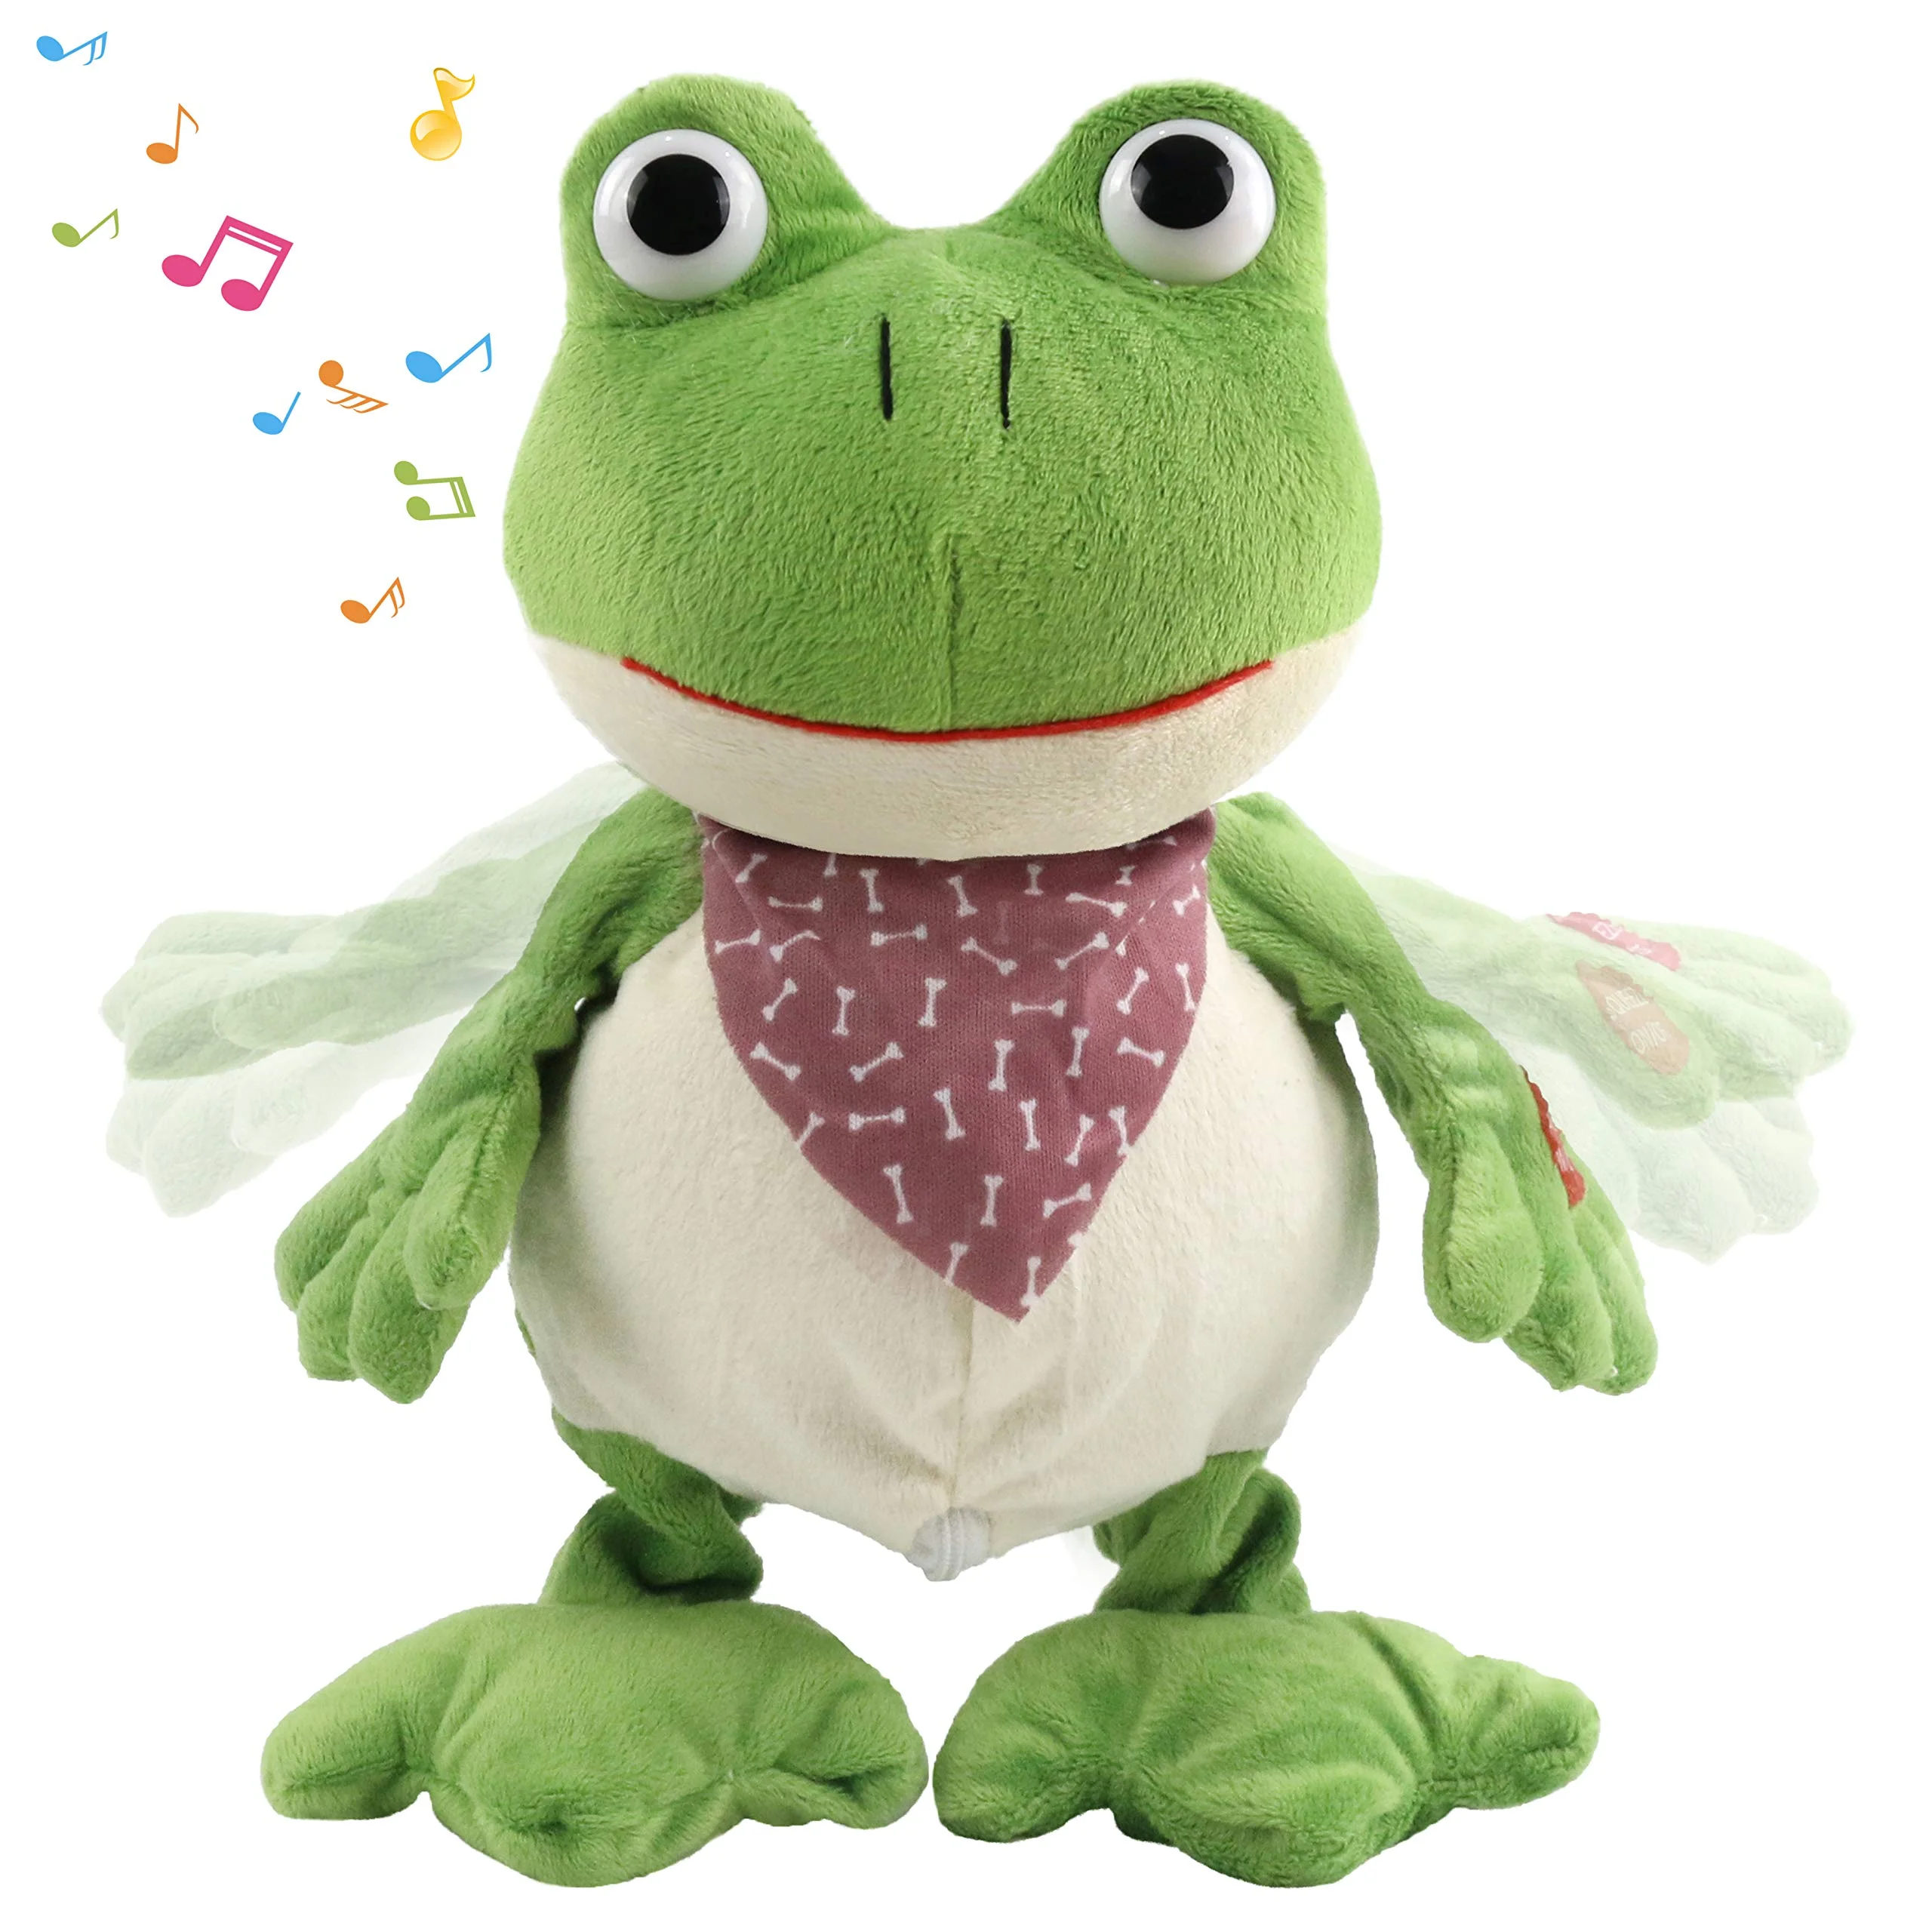 30cm Singing Frog Swinging Gift Stuffed Toy Animals Doll Musical Birthday Festival Gifts Plush Cotton SoftToys for Girls